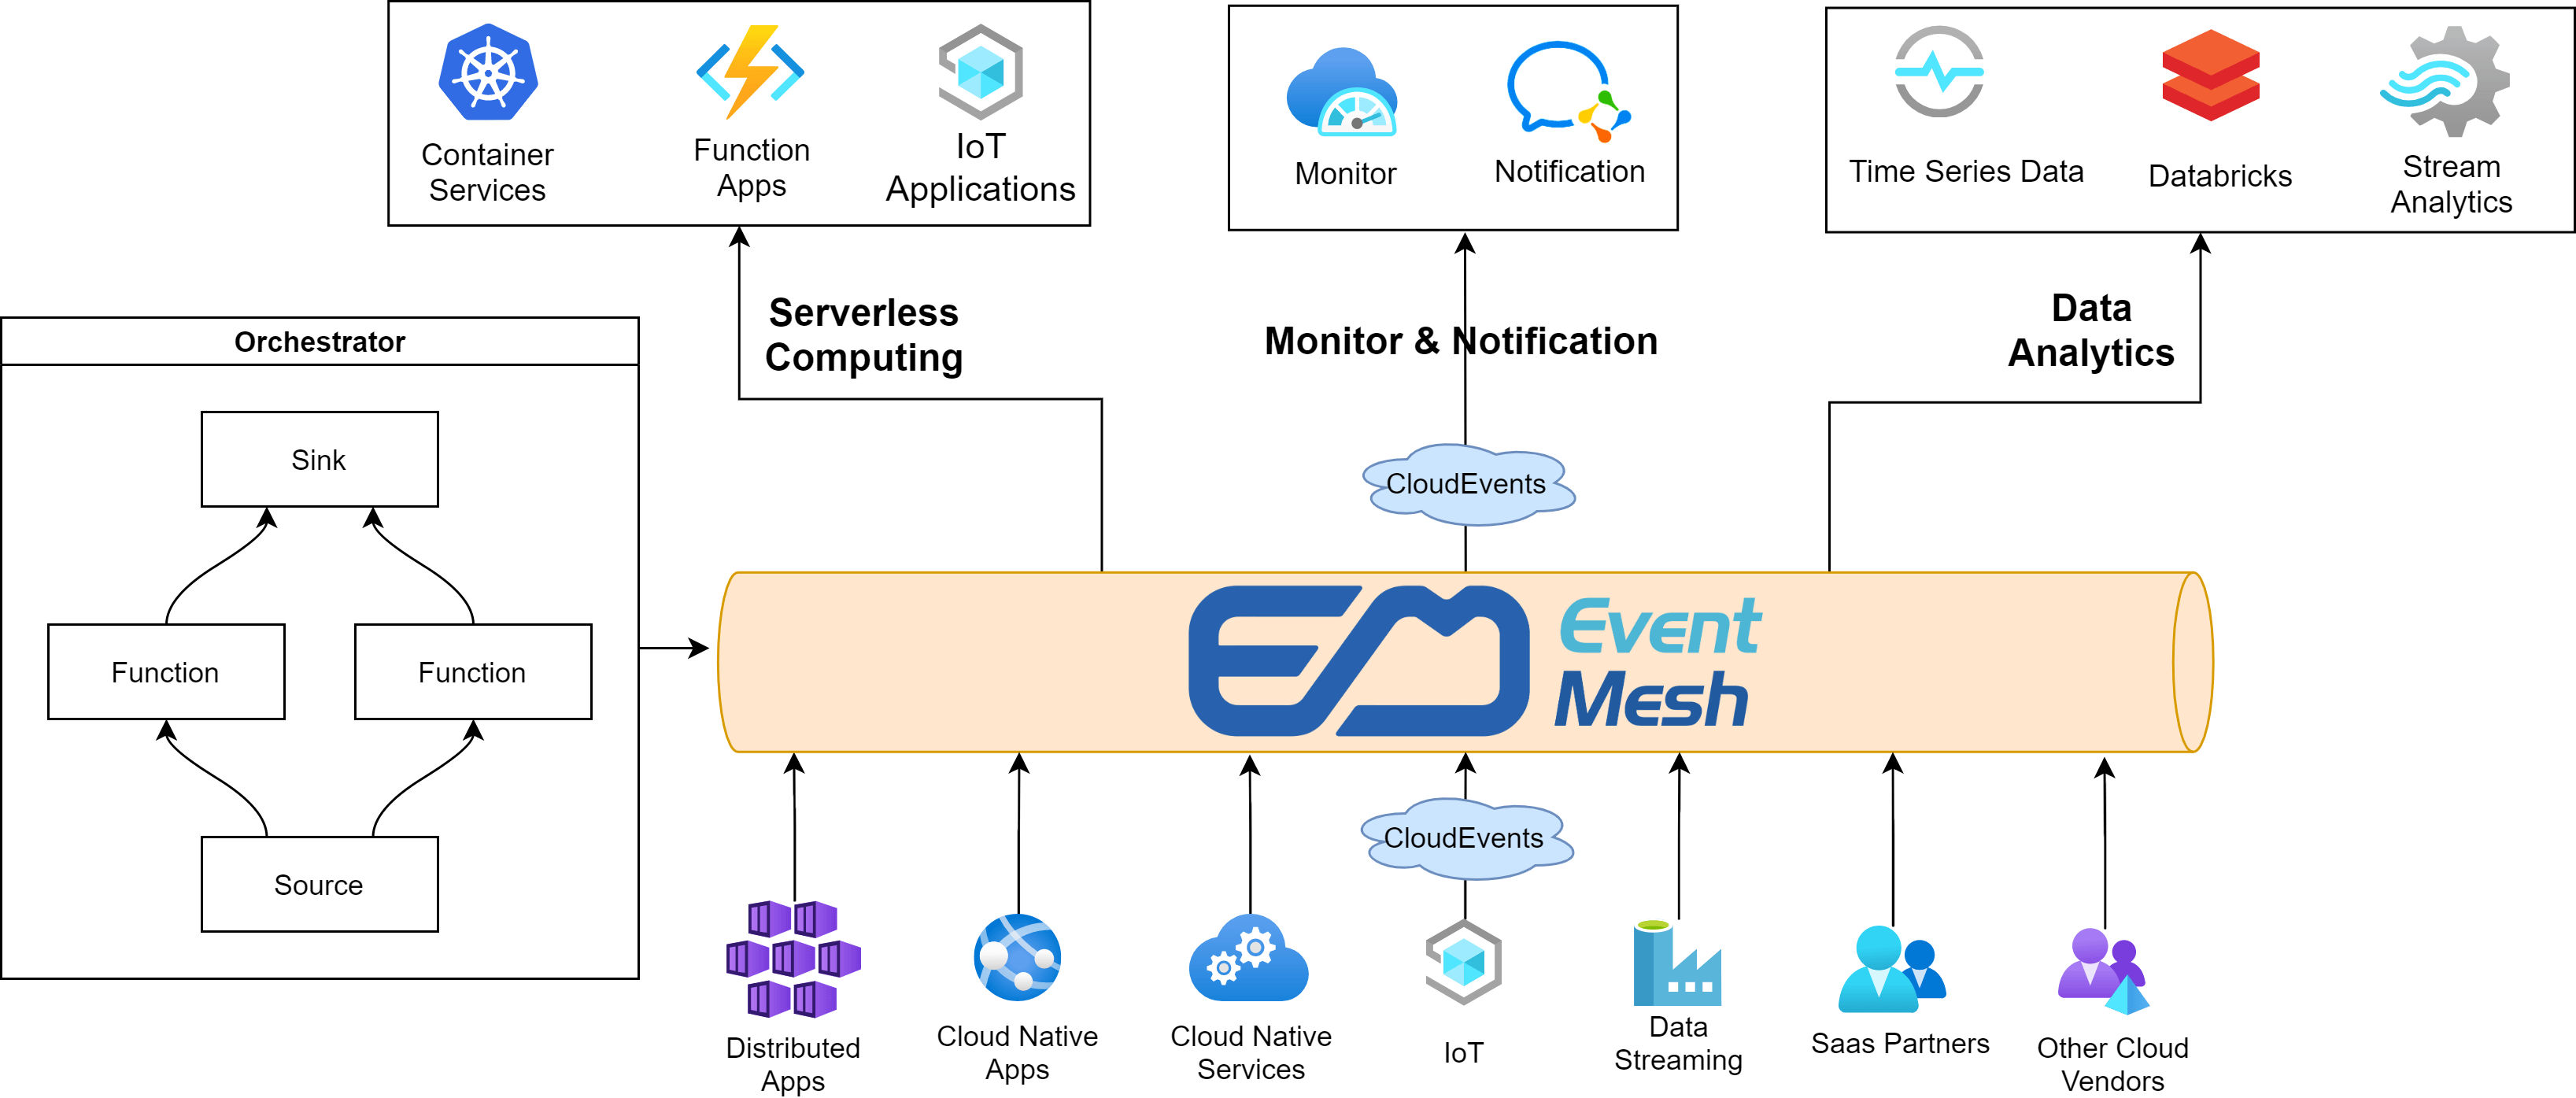 eventmesh-orchestration.png